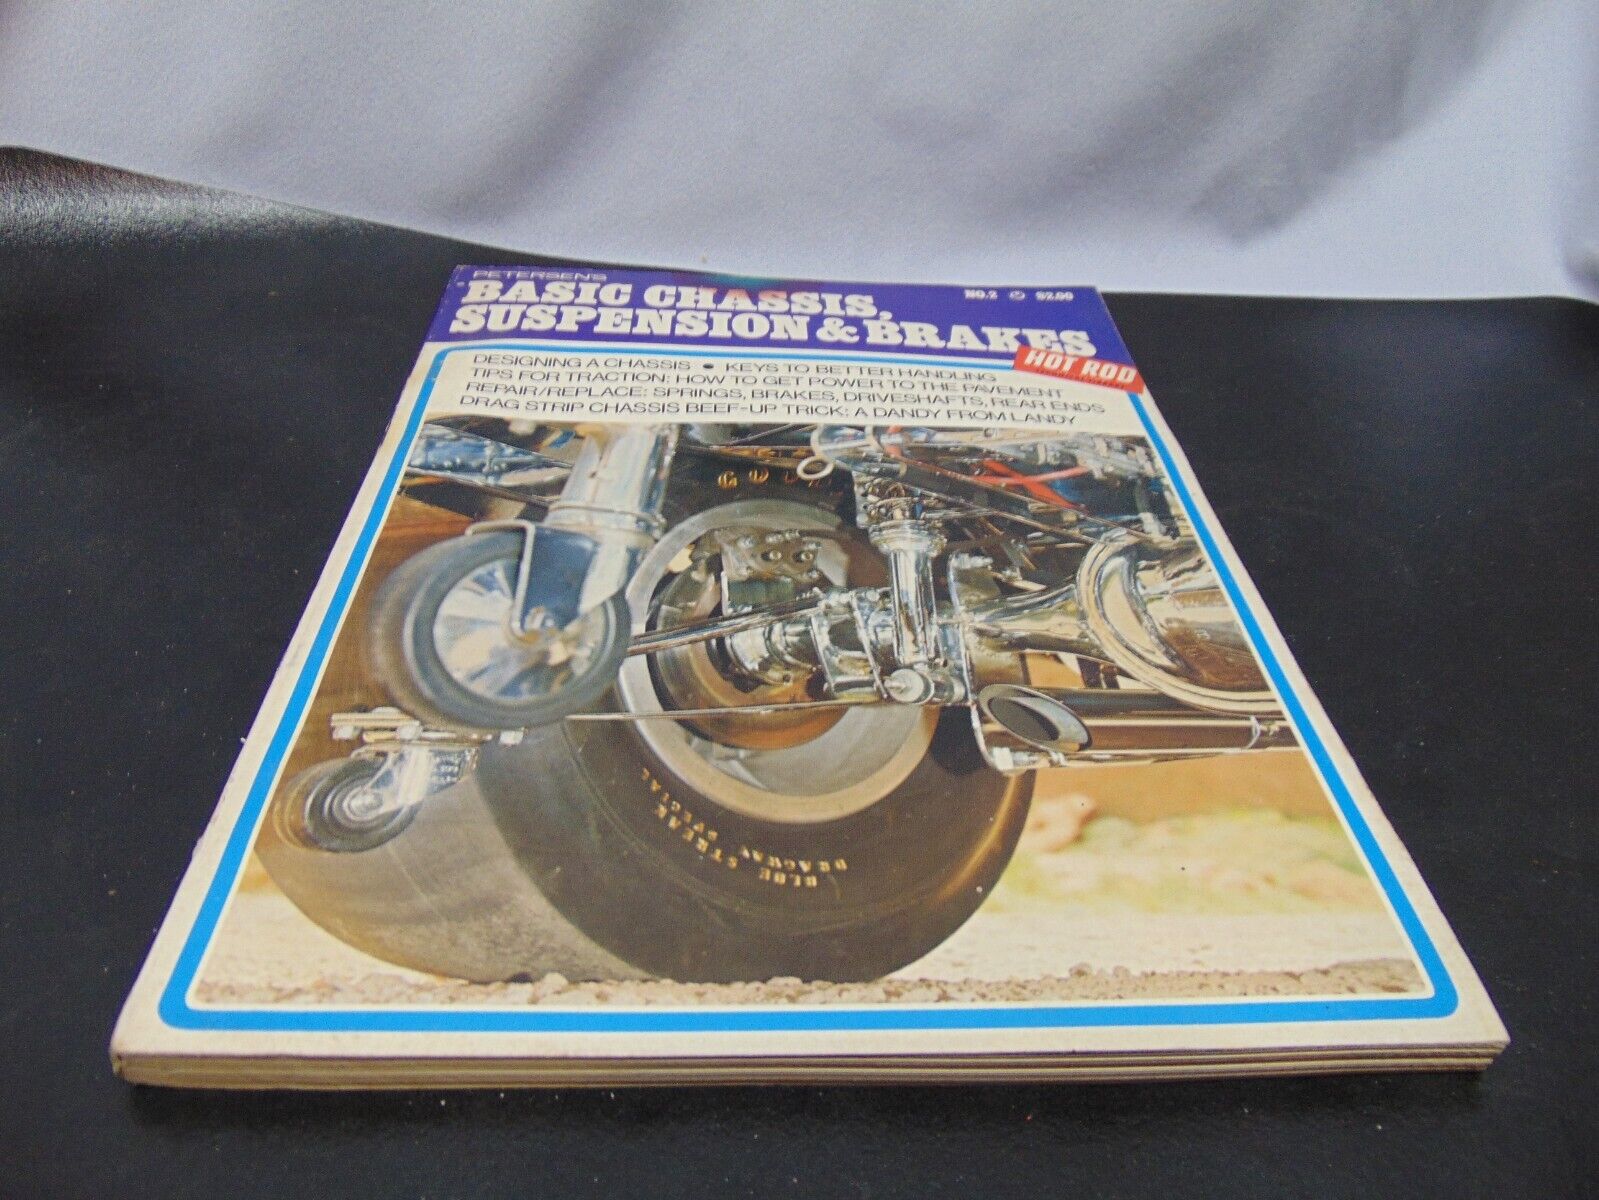 1971 Petersen\'s Basic Chassis, Suspension & Brakes for Hot Rod Book #2 192 pages